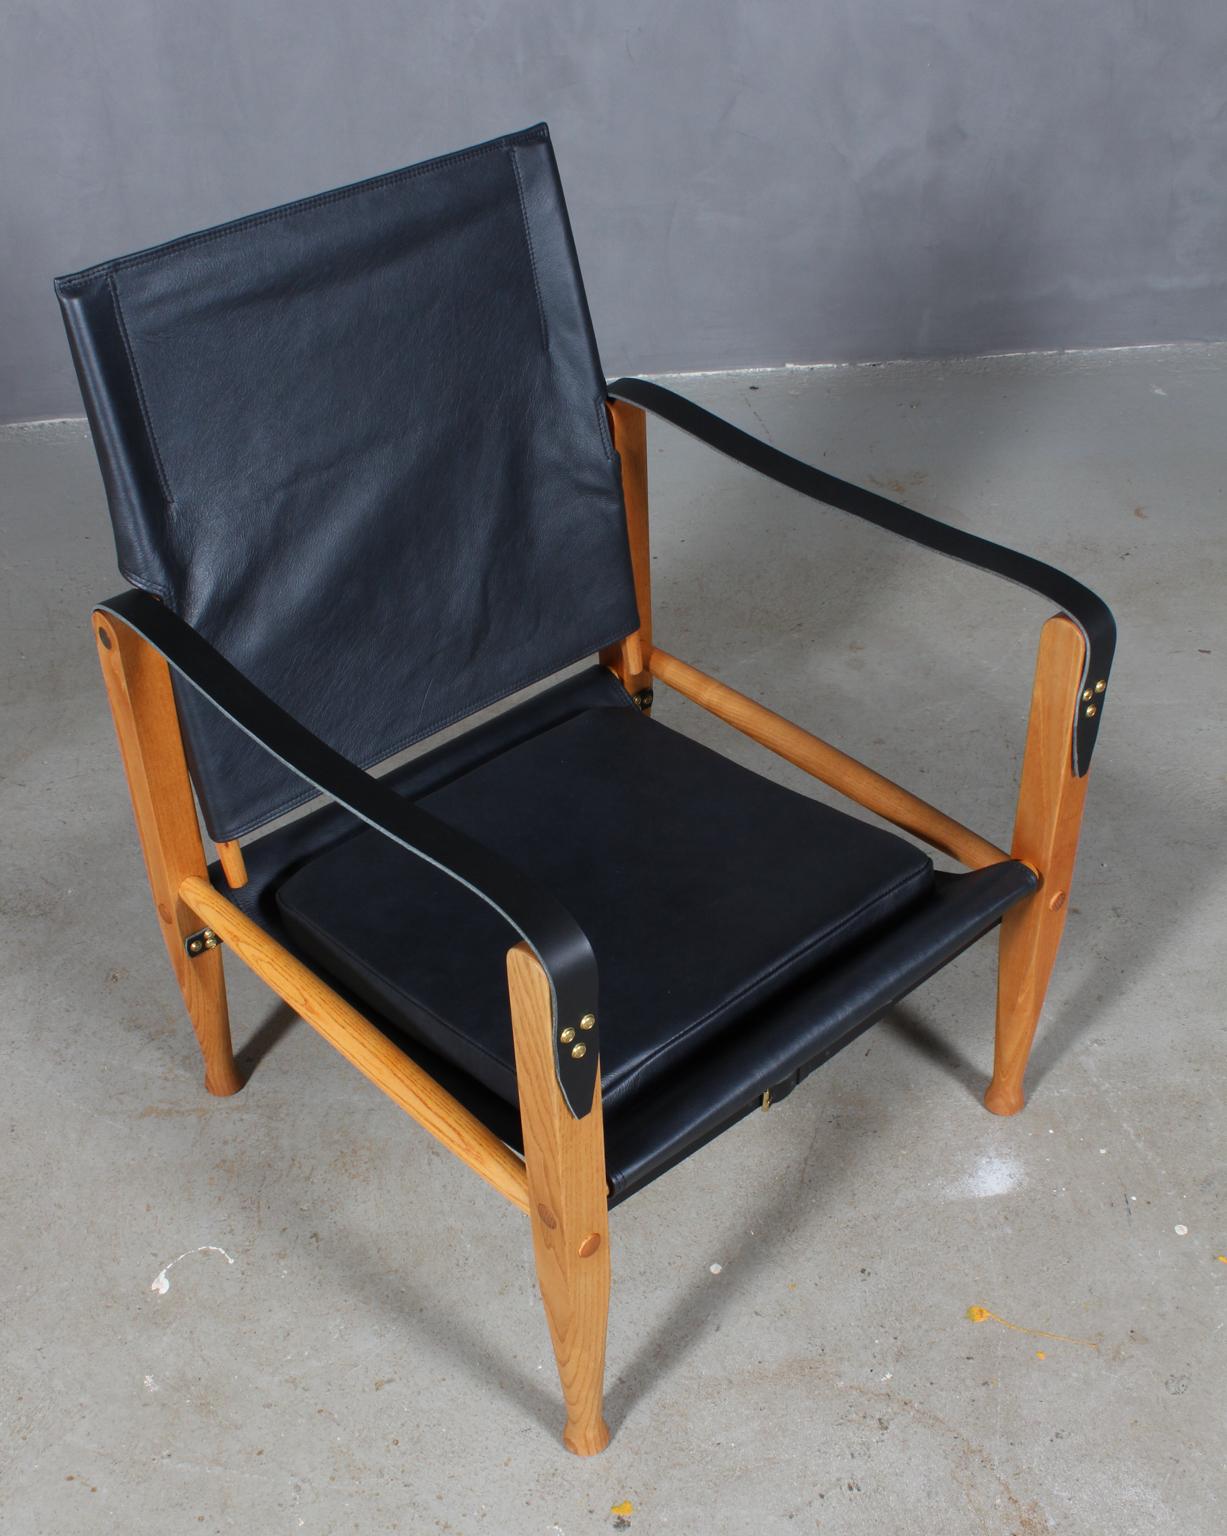 Kaare Klint for Rud Rasmussen. Safari chair new upholstered with black aniline leather. Straps in new butt leather.

Frame in solid ash.

Model Safari chair, made by Rud Rasmussen.